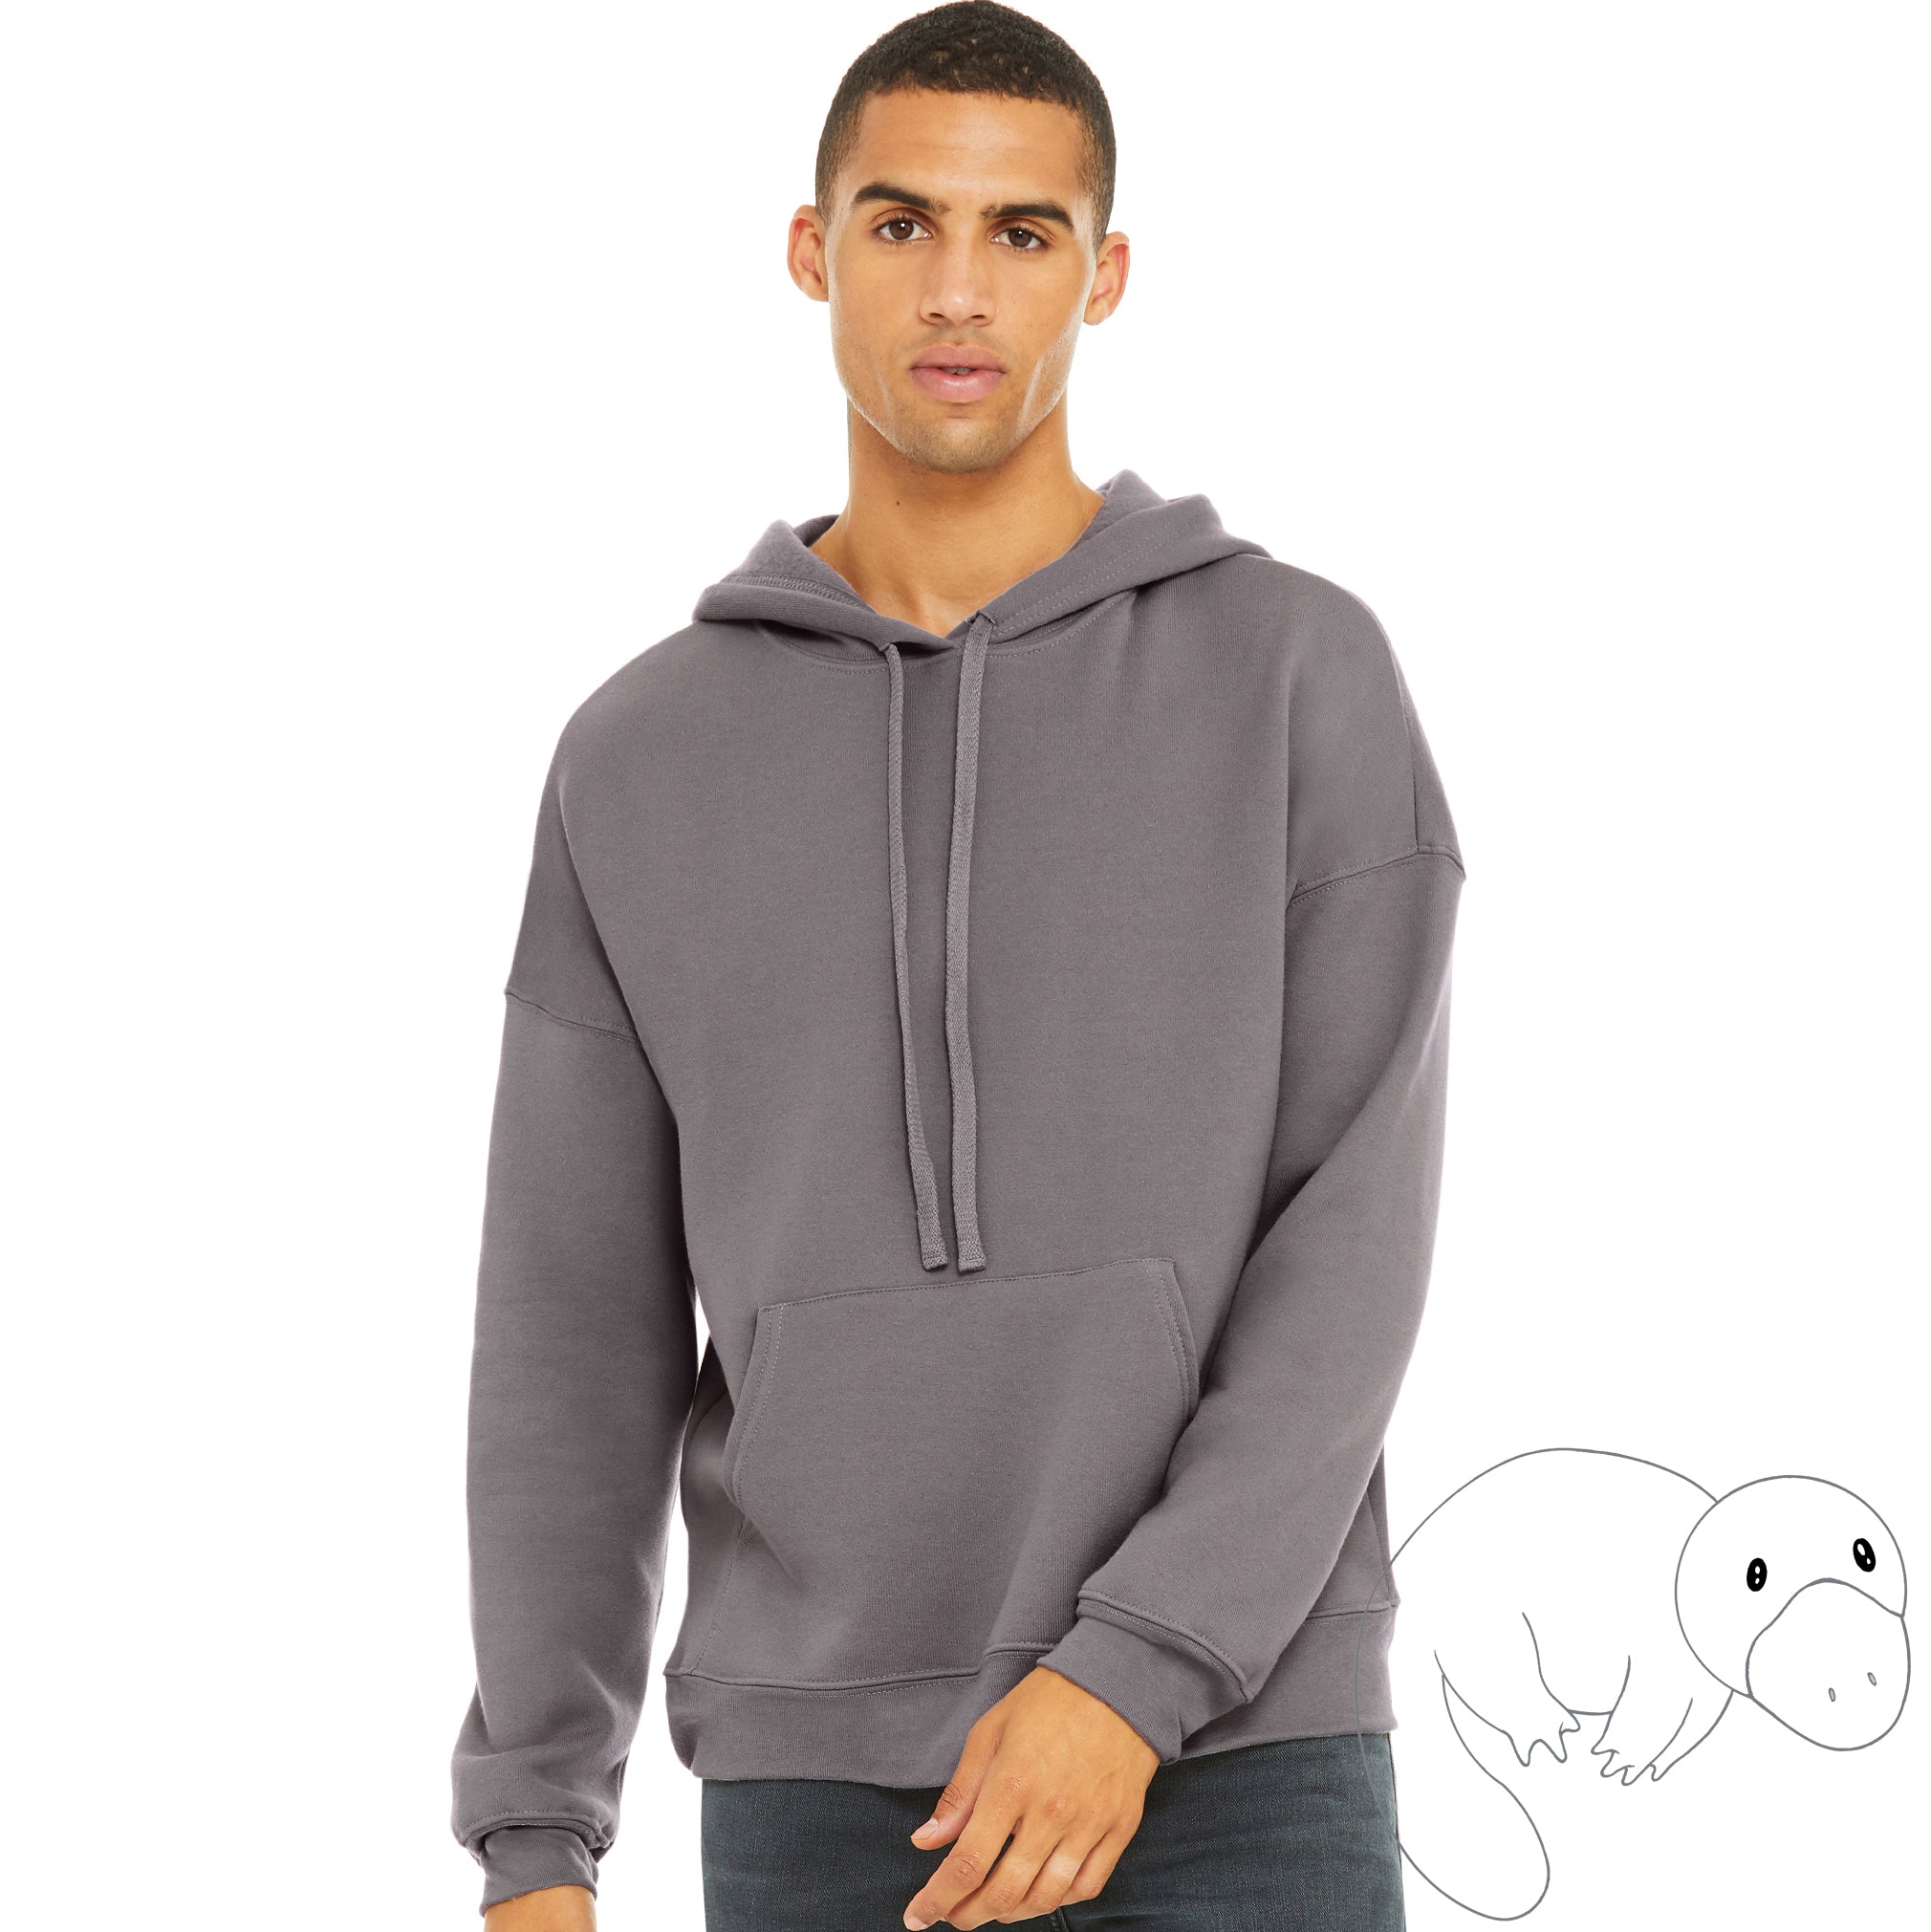 new-product-soft-sweatshirt-cozy-warm-stone-grey-coulds-sky-storm-color-hoodie-face-mask-Plats-Hoodie-facemask-all-in-one-convertible-plats-hoodie-platinum-platypus-guy-millennial-boy-man-beautiful-eyes-blue-green-young-cute